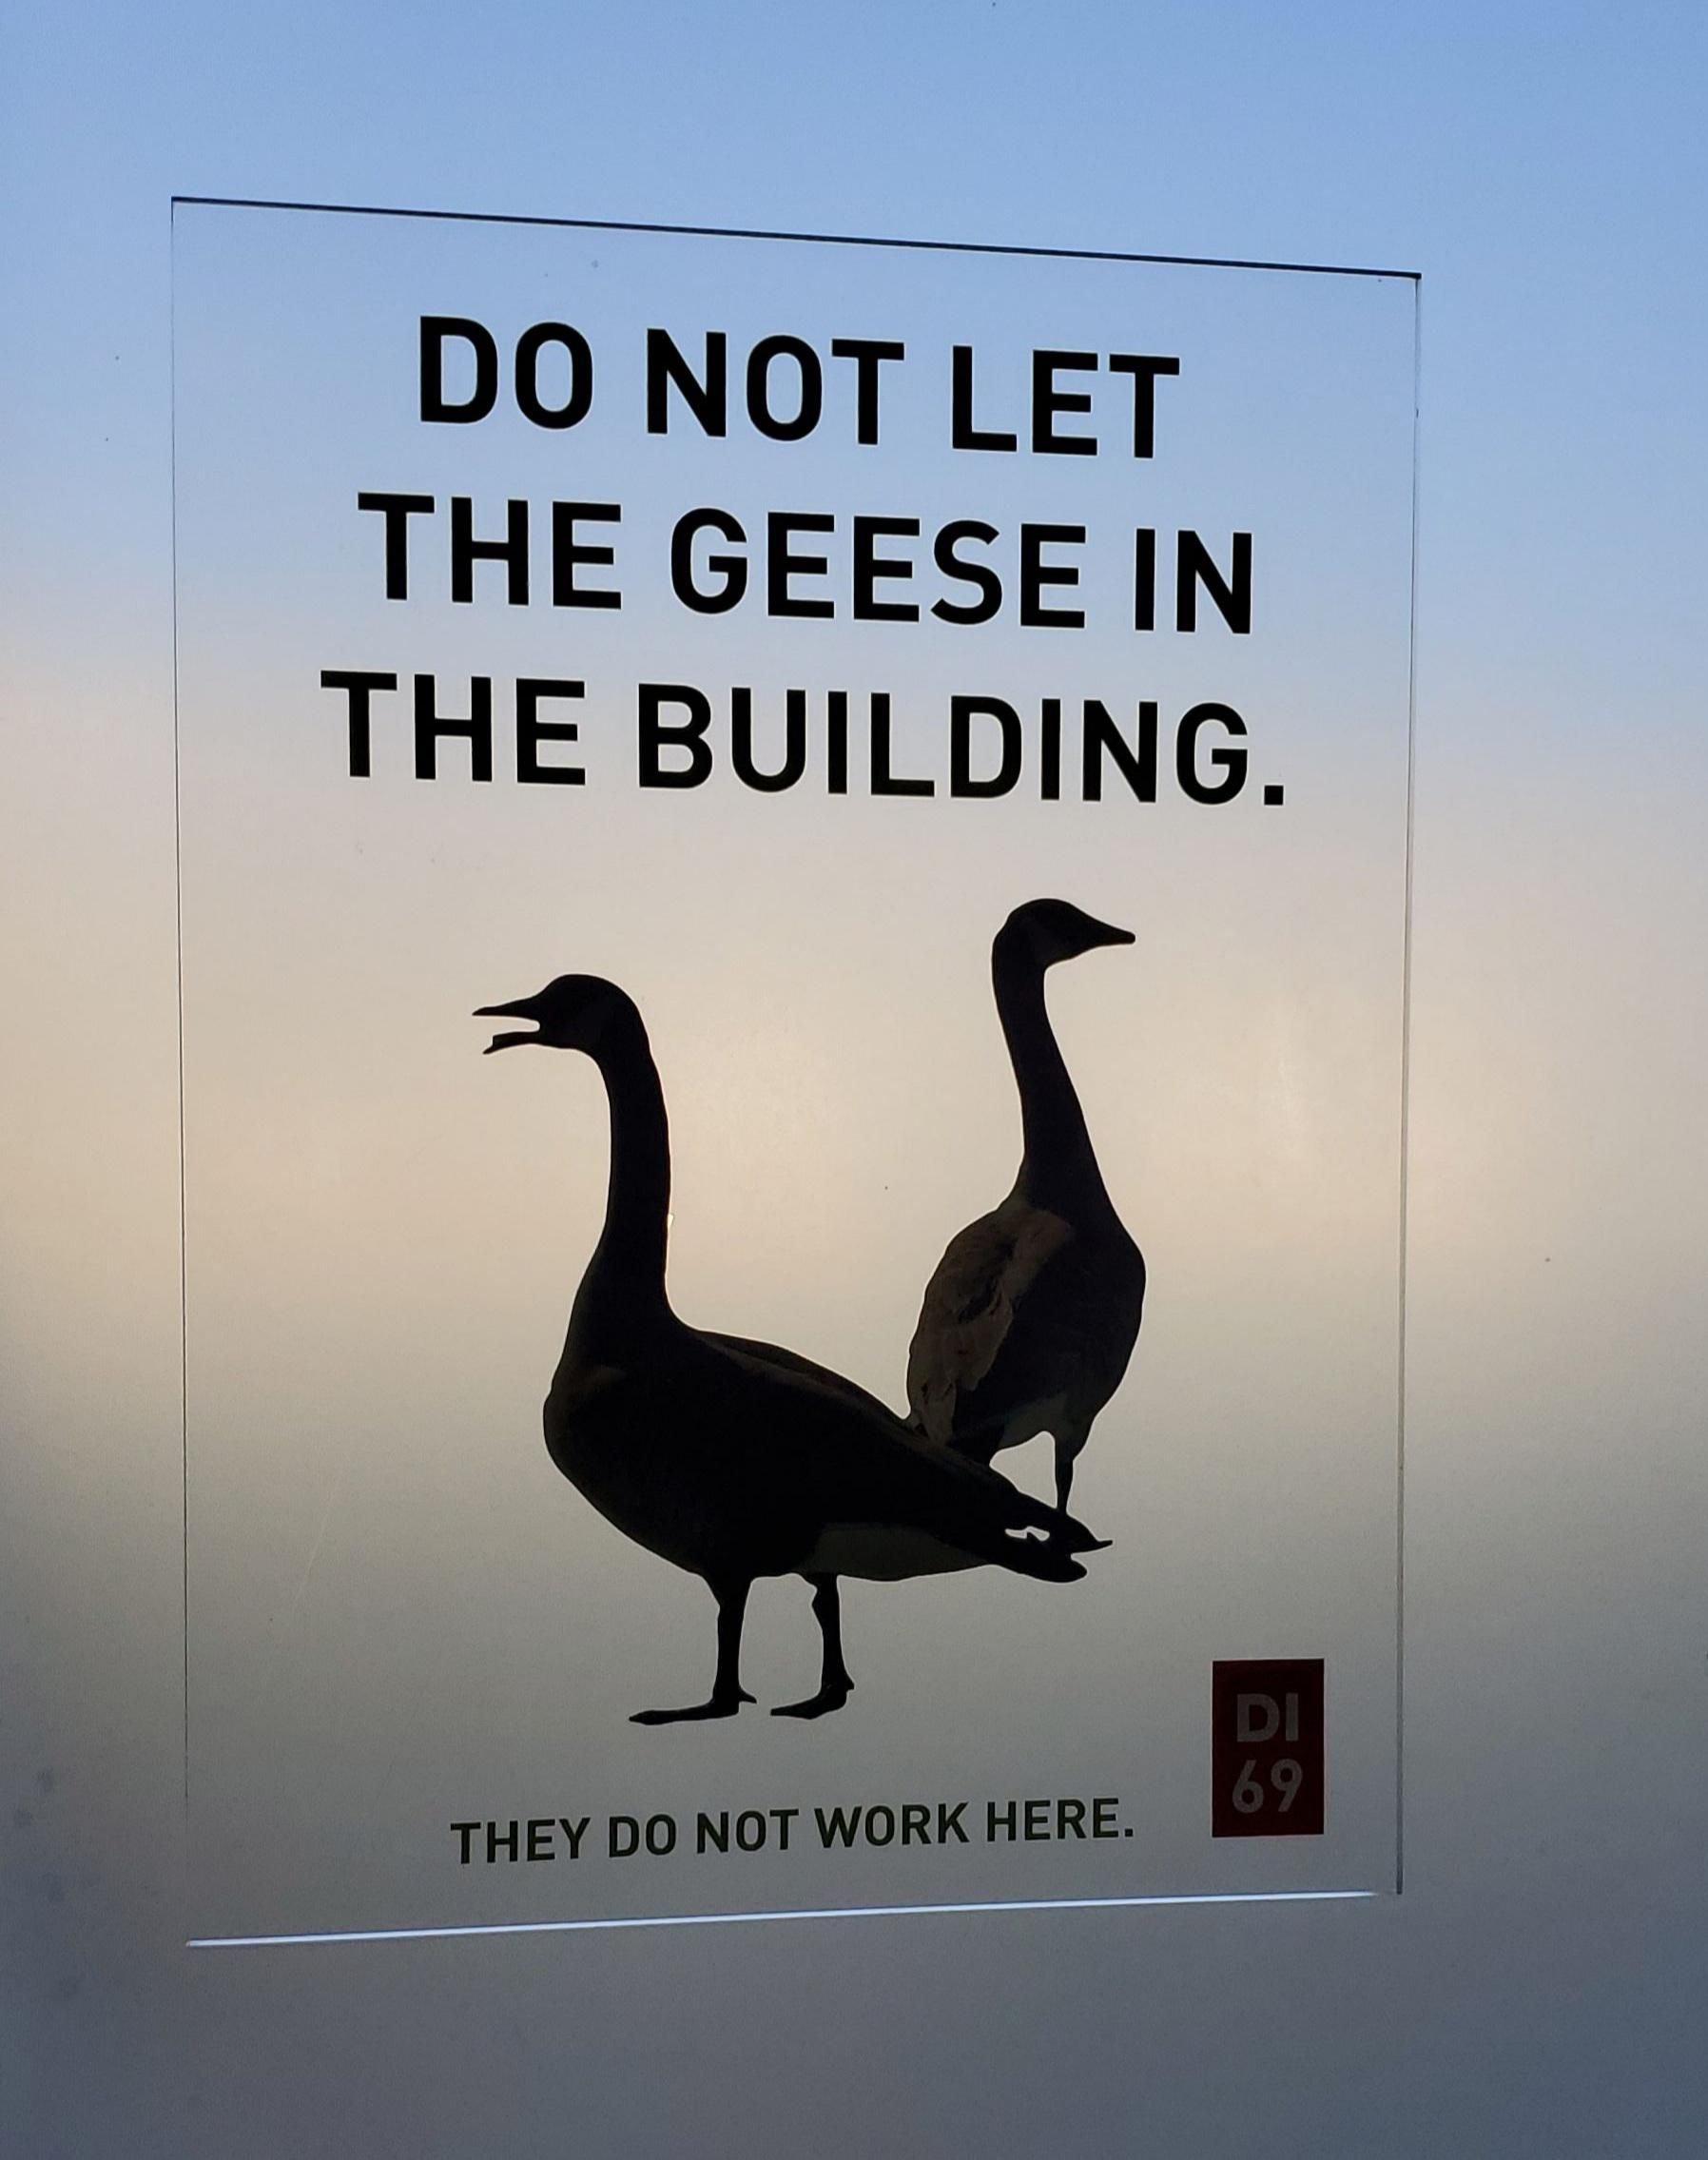 Who keeps letting the geese in the building??